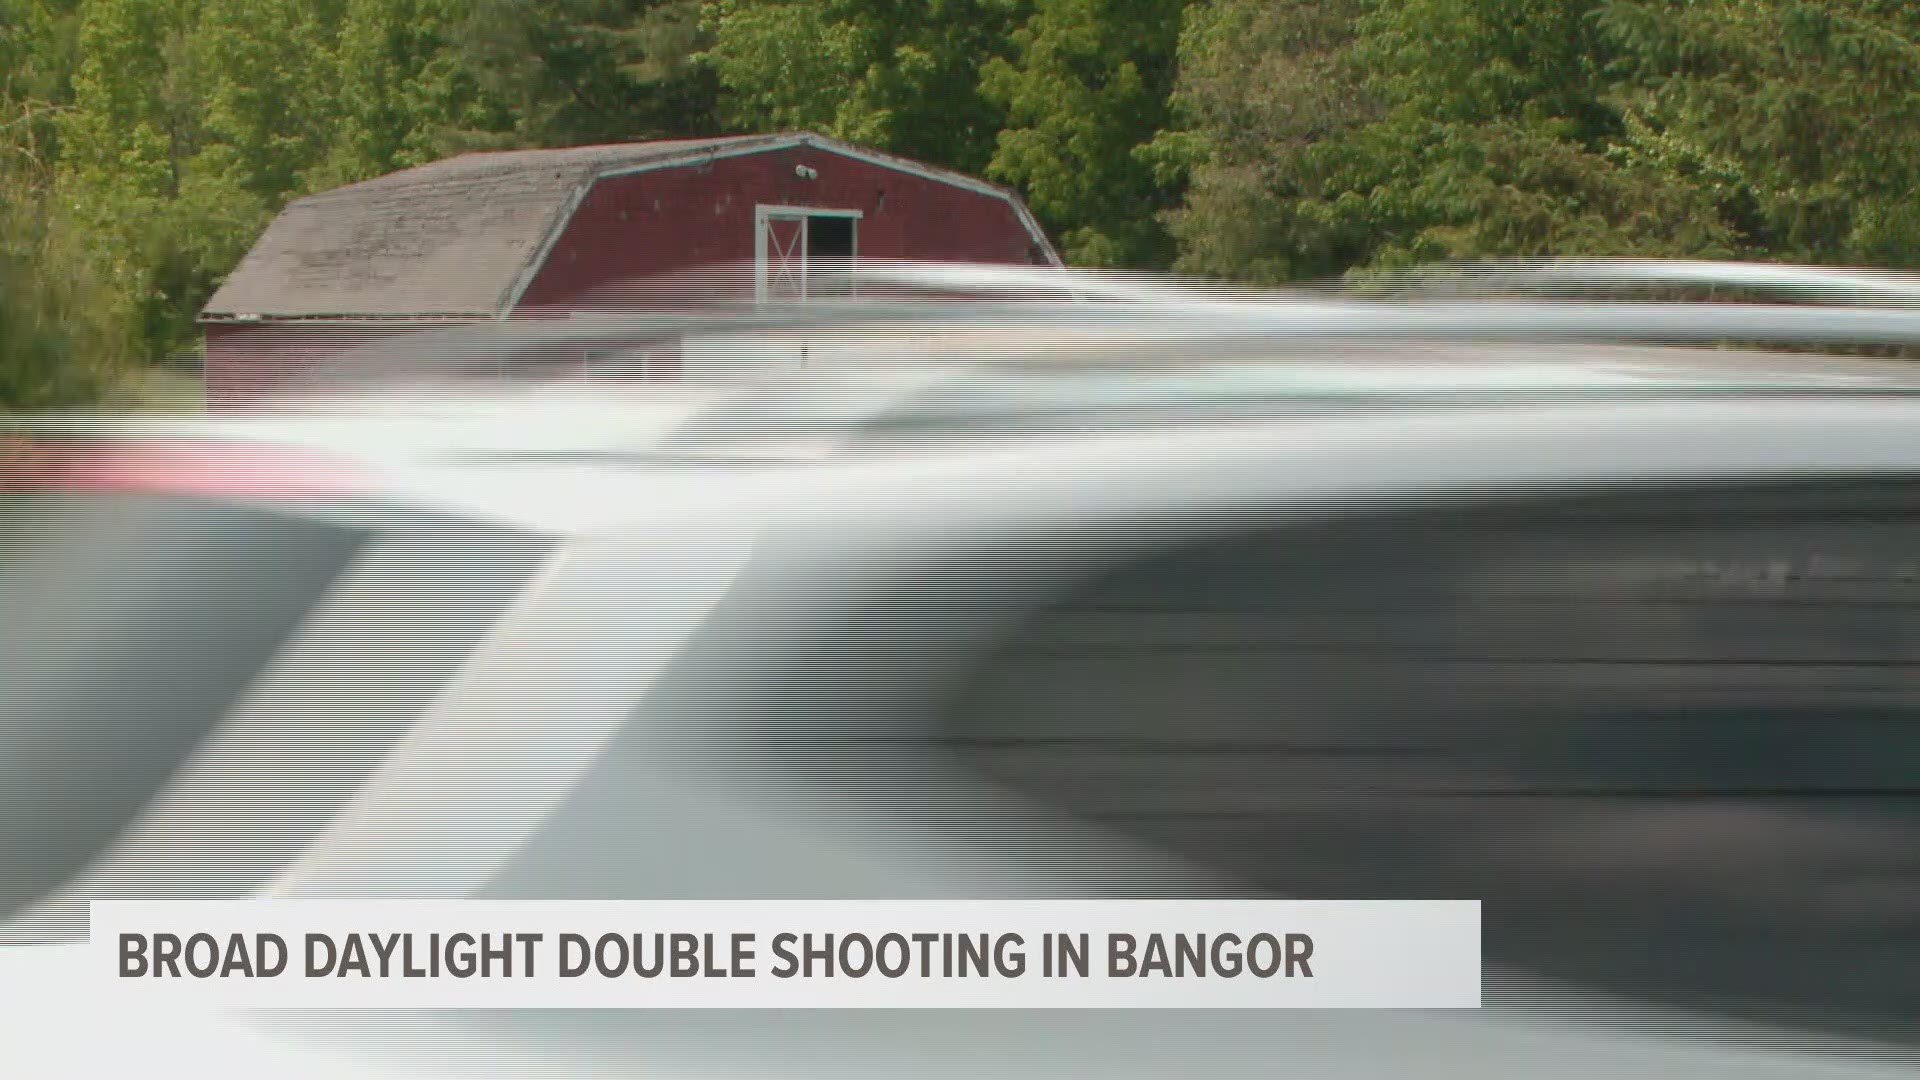 Police say two people were hurt in a double shooting in broad daylight in Bangor on Tuesday.